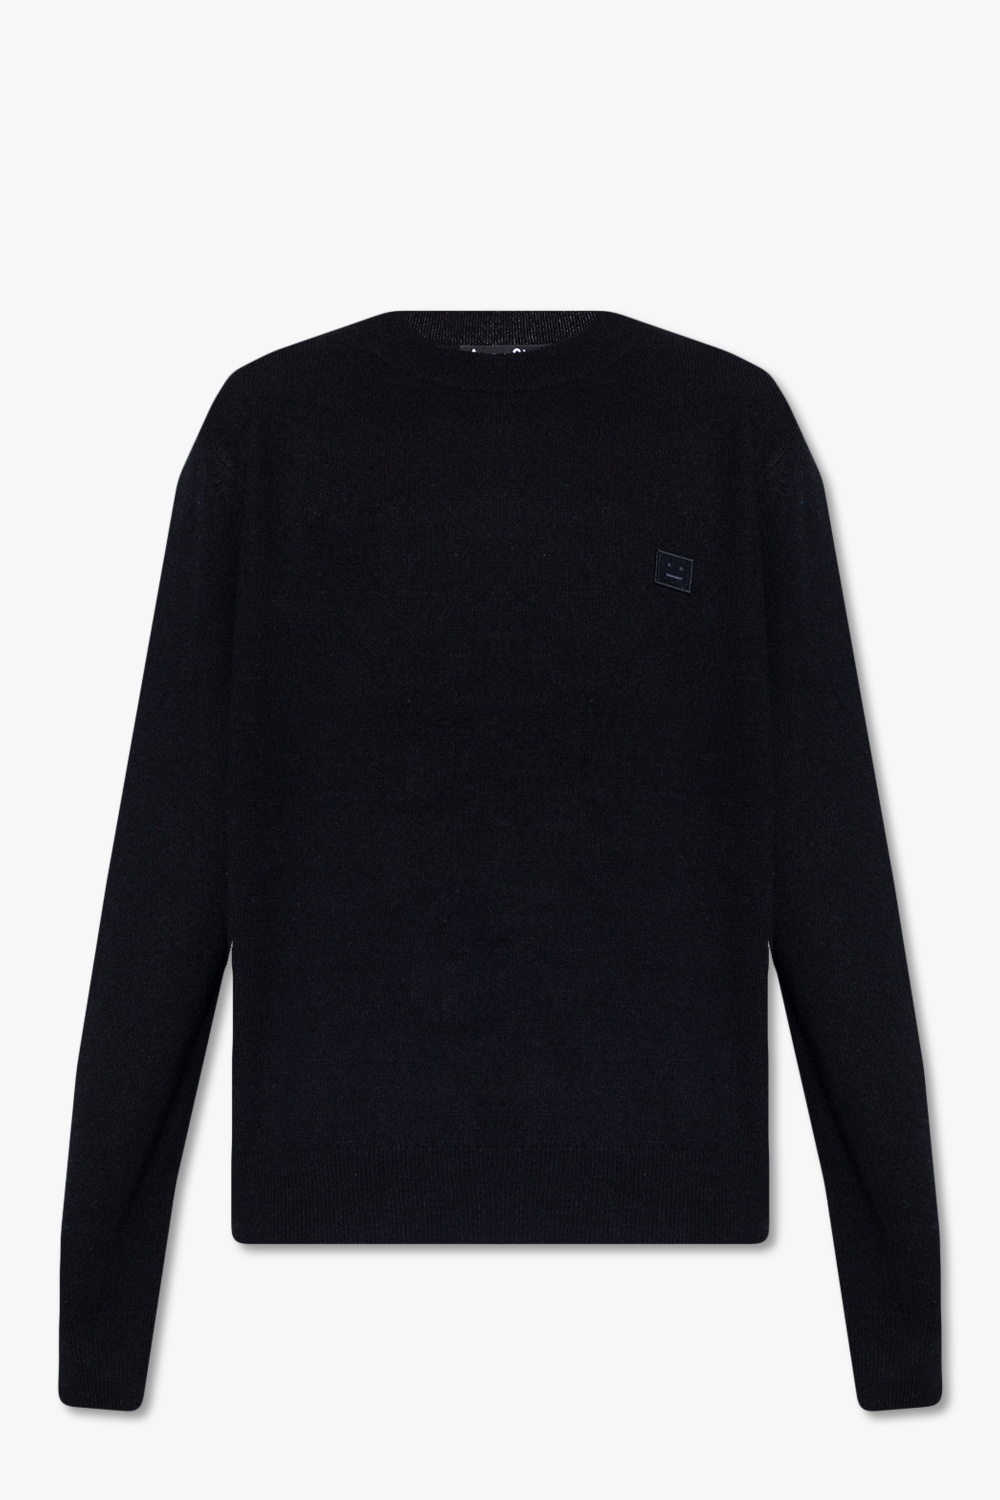 Acne Studios Supersoft Long Sleeve Valley Pullover